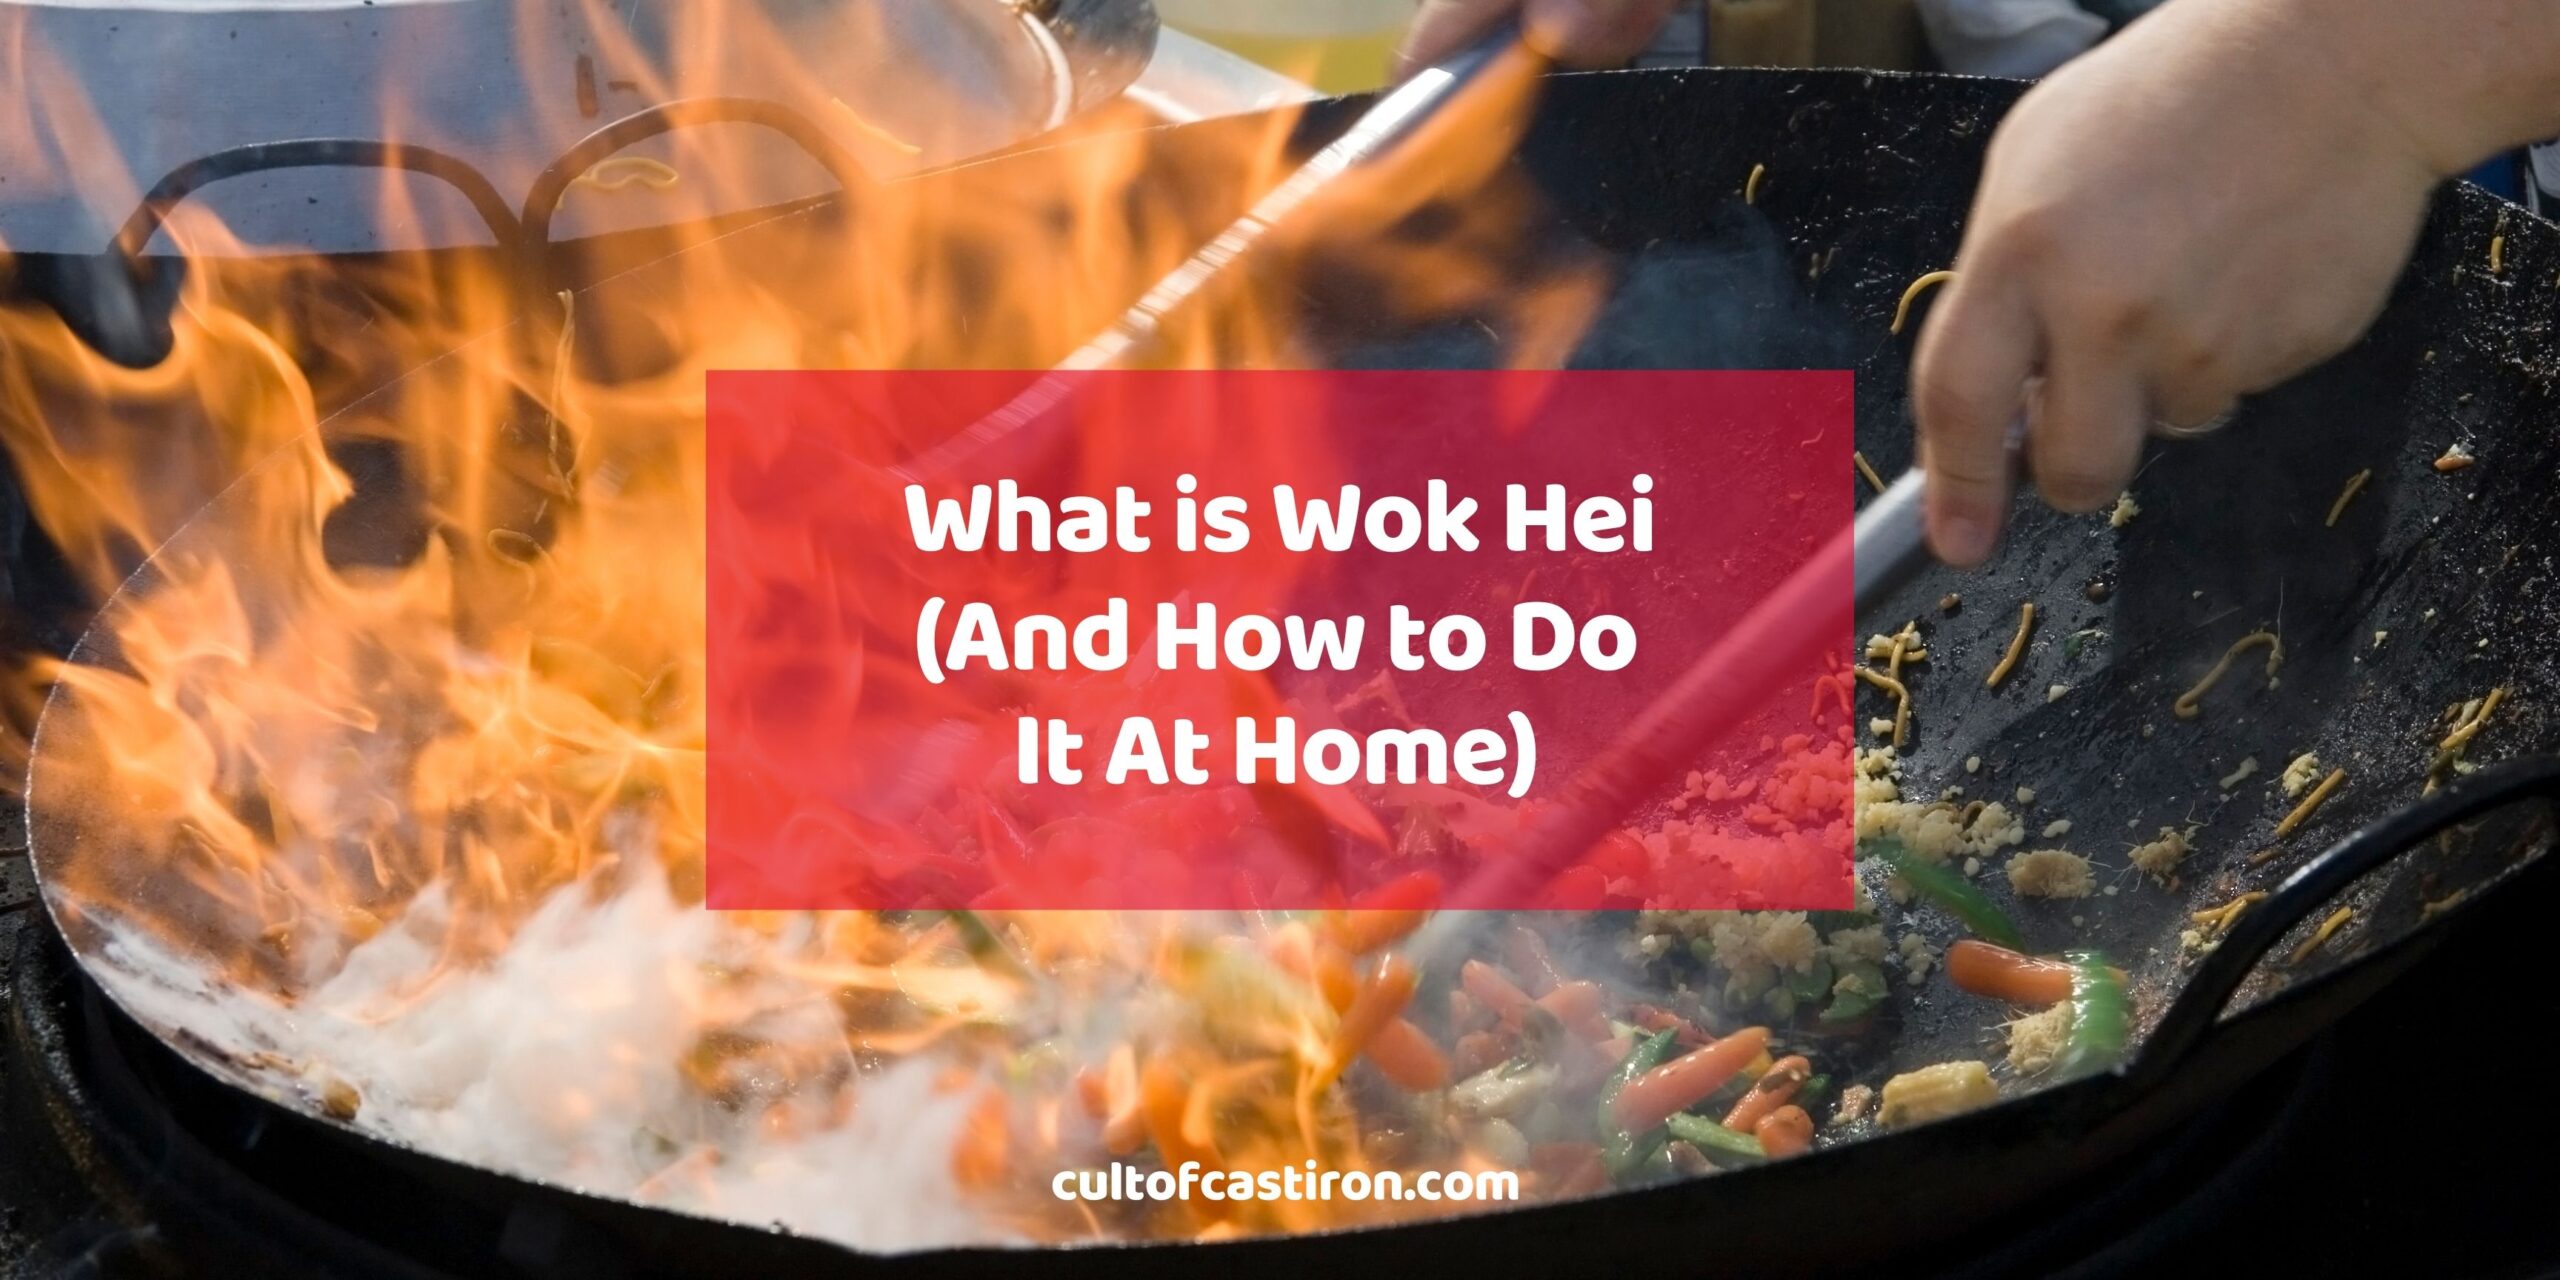 What iswok hei?